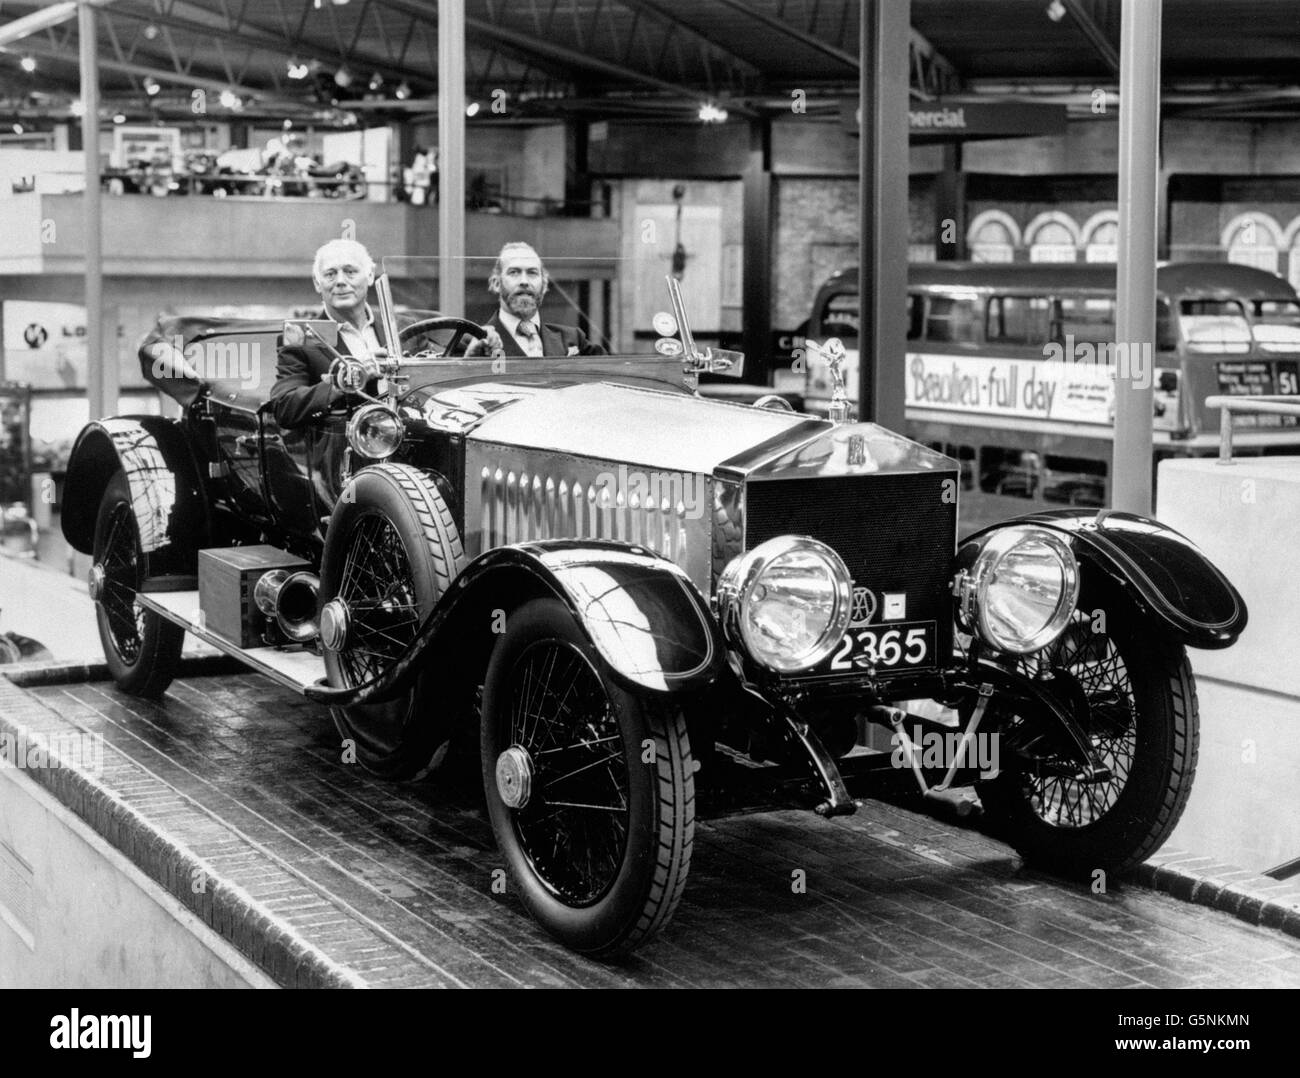 Lord Montagu of Beaulieu and Prince Michael of Kent at the National Motor Museum, Beaulieu, Hampshire. They are ready to head off for Australia in a Rolls Royce 'Silver Ghost'. Stock Photo